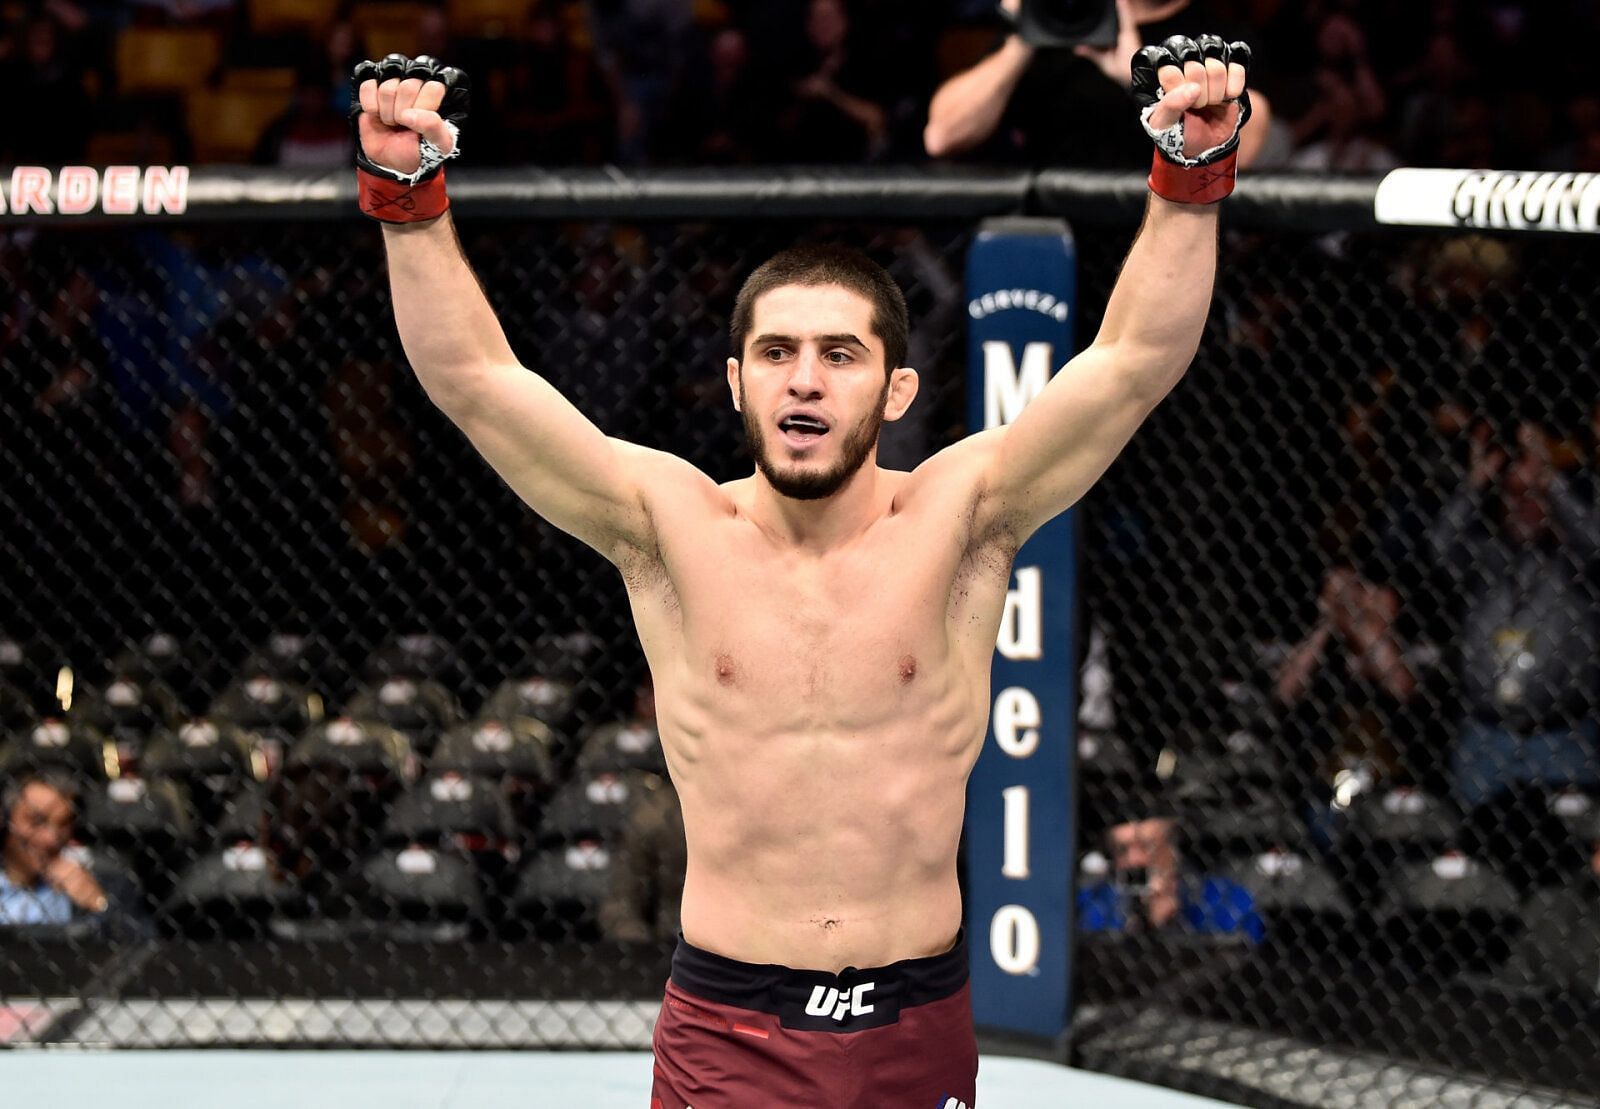 Islam Makhachev will return to action in February